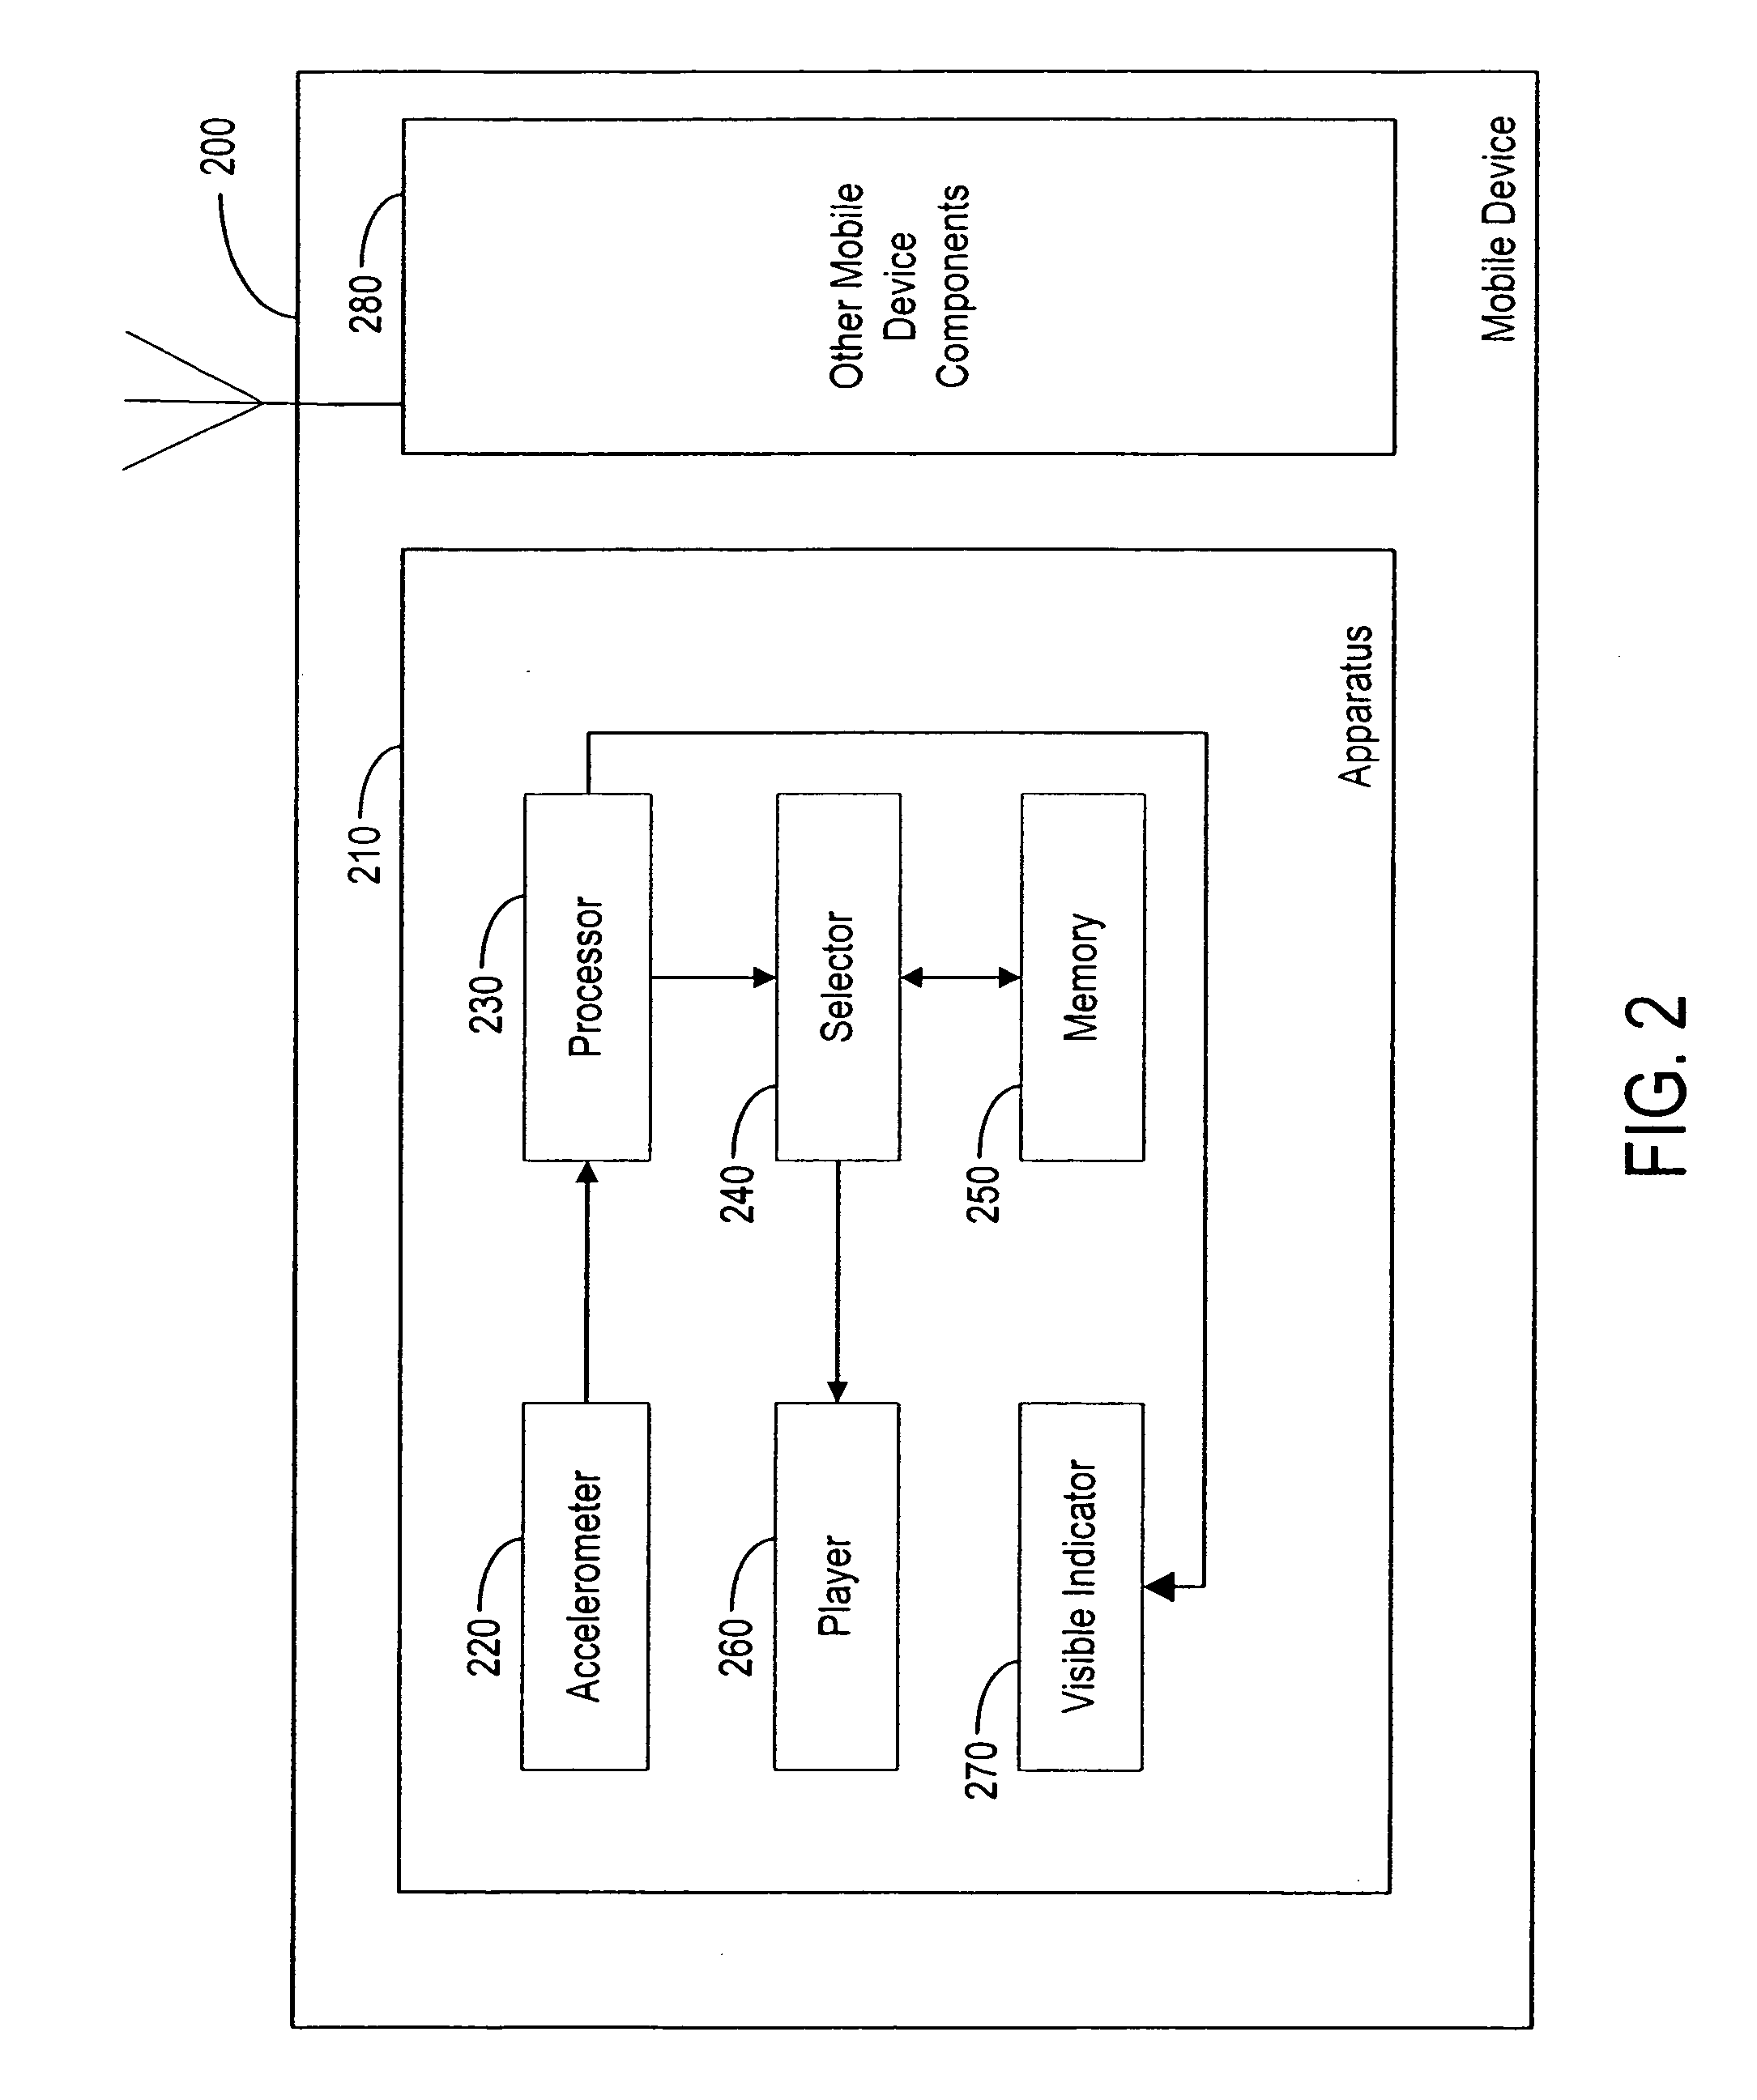 Method, apparatus and software for play list selection in digital music players